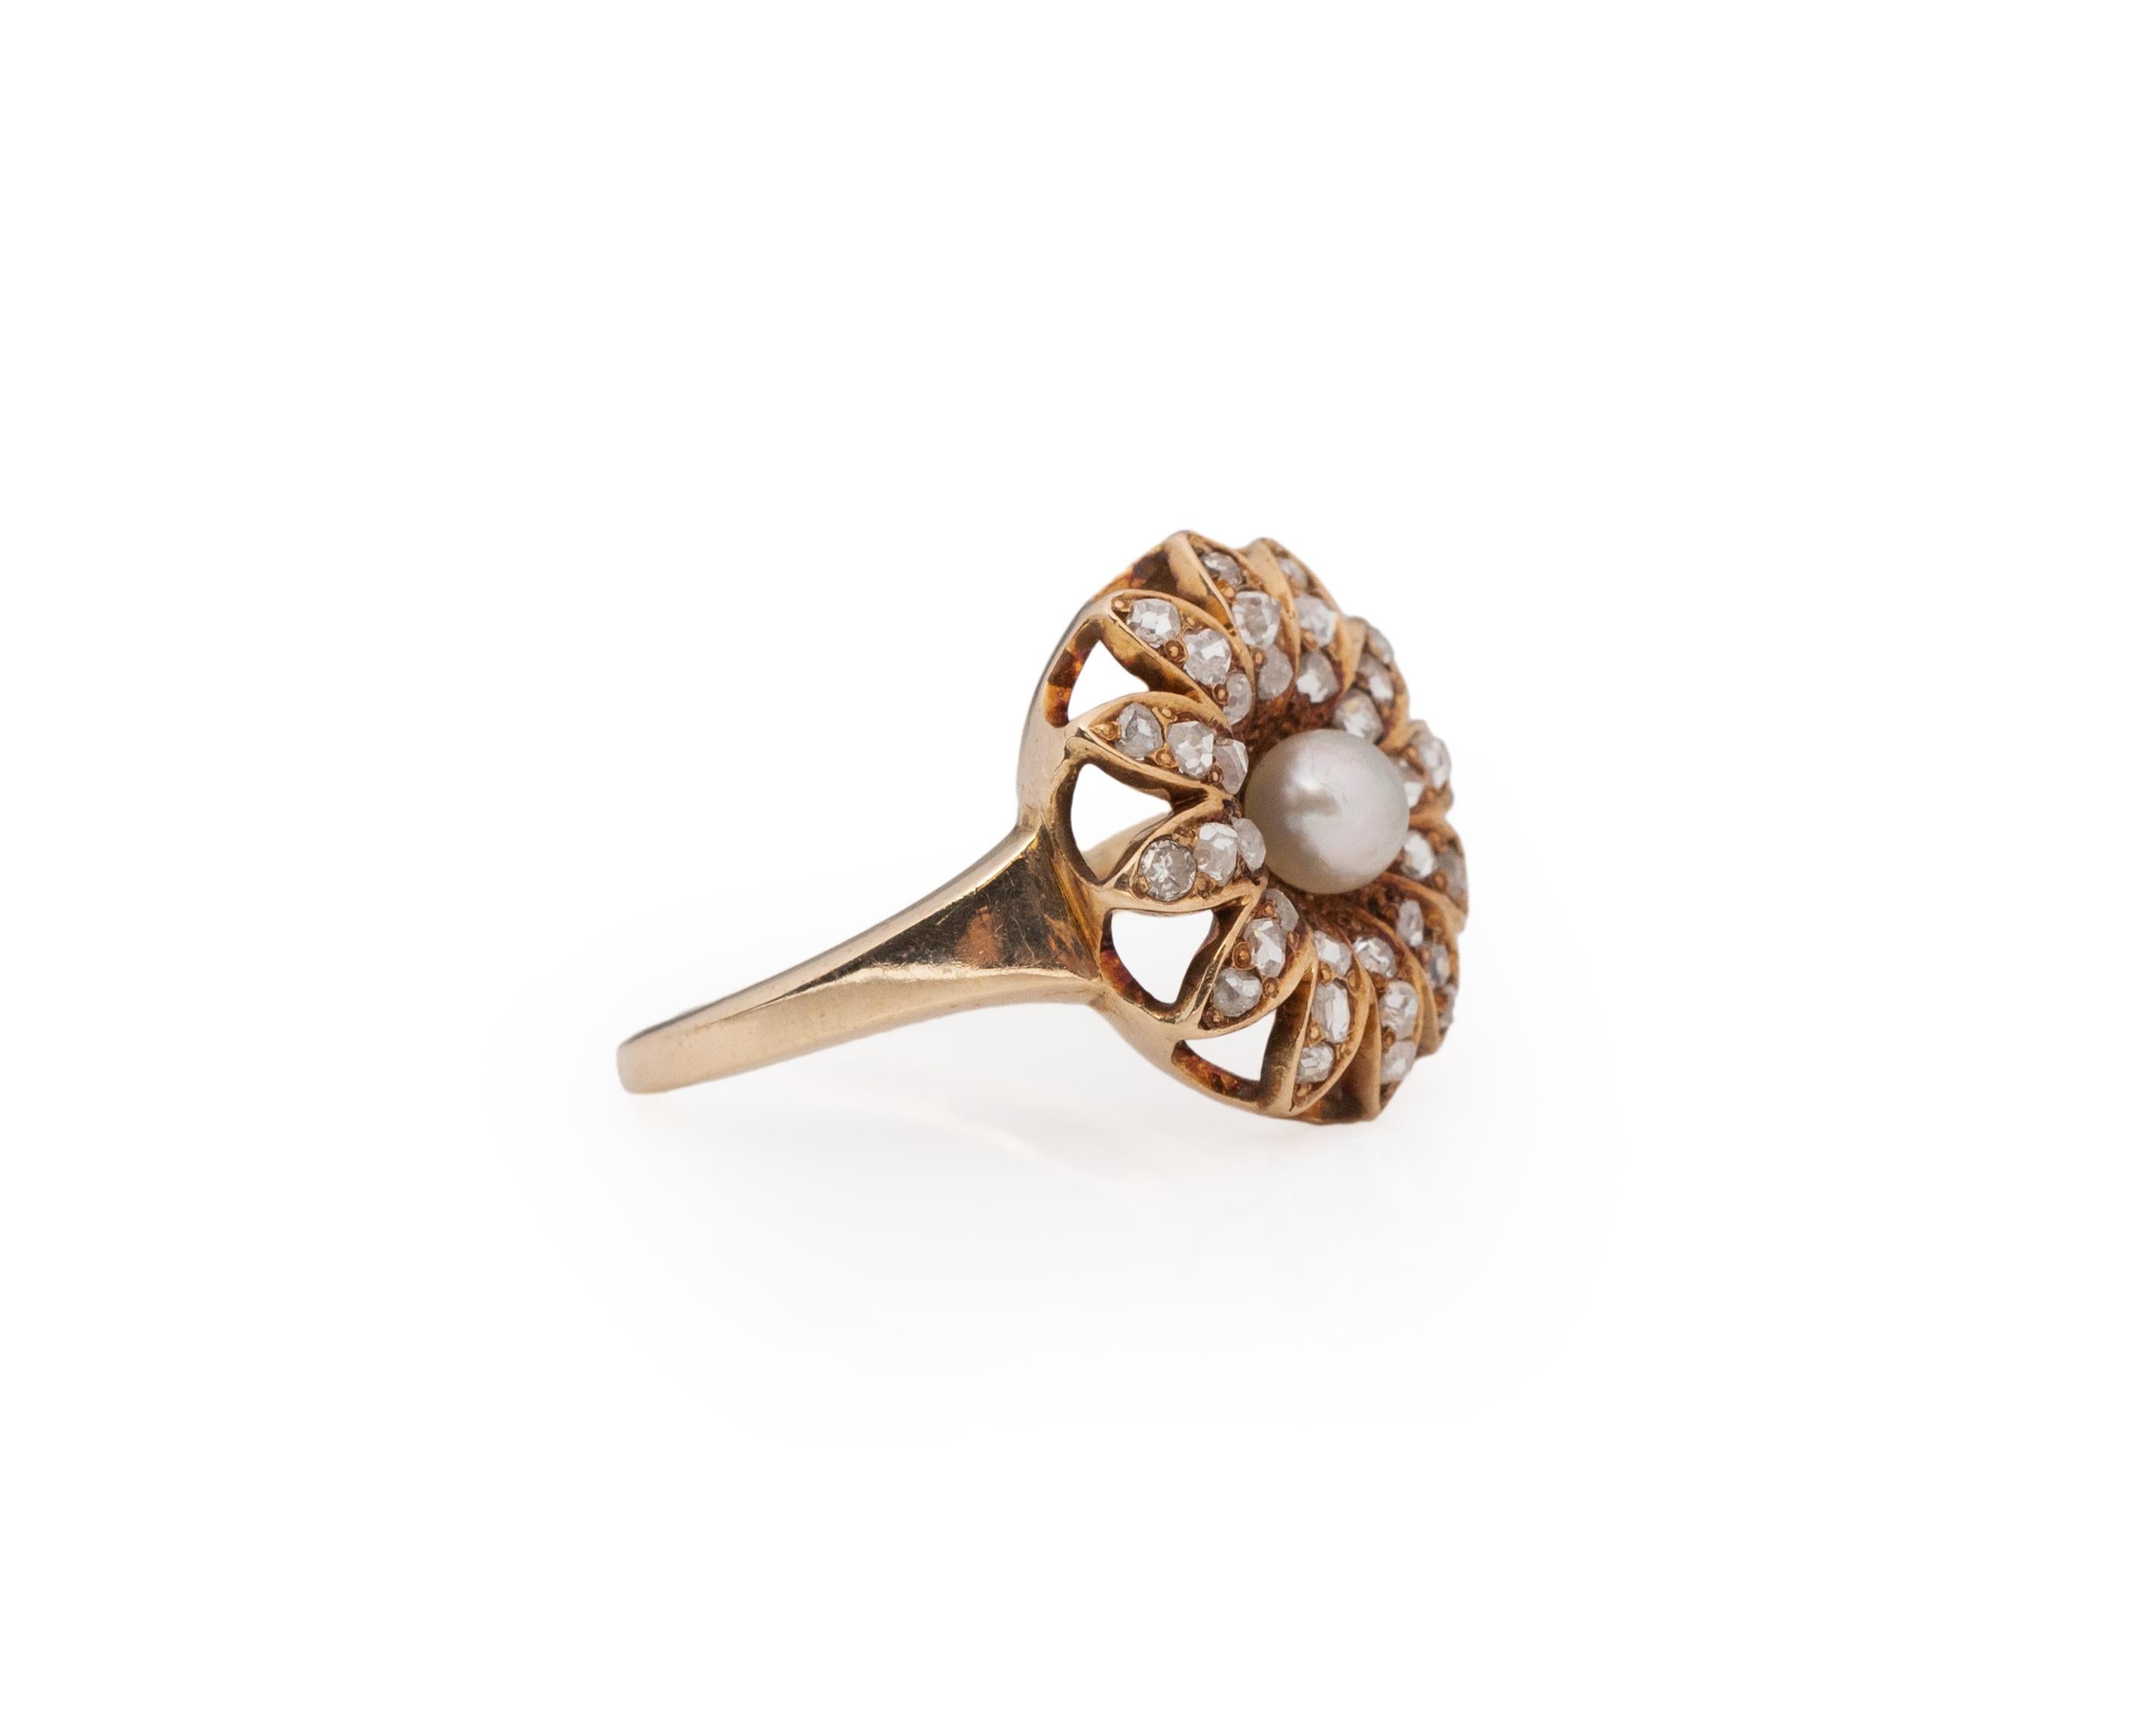 Ring Size: 5
Metal Type: 14K Yellow Gold [Hallmarked, and Tested]
Weight: 3.6 grams

Pearl: Natural, Pinkish-White

Diamond Details:
Weight: .30ct, total weight
Cut: Rose Cut, Antique
Color: H
Clarity: VS

Finger to Top of Stone Measurement: